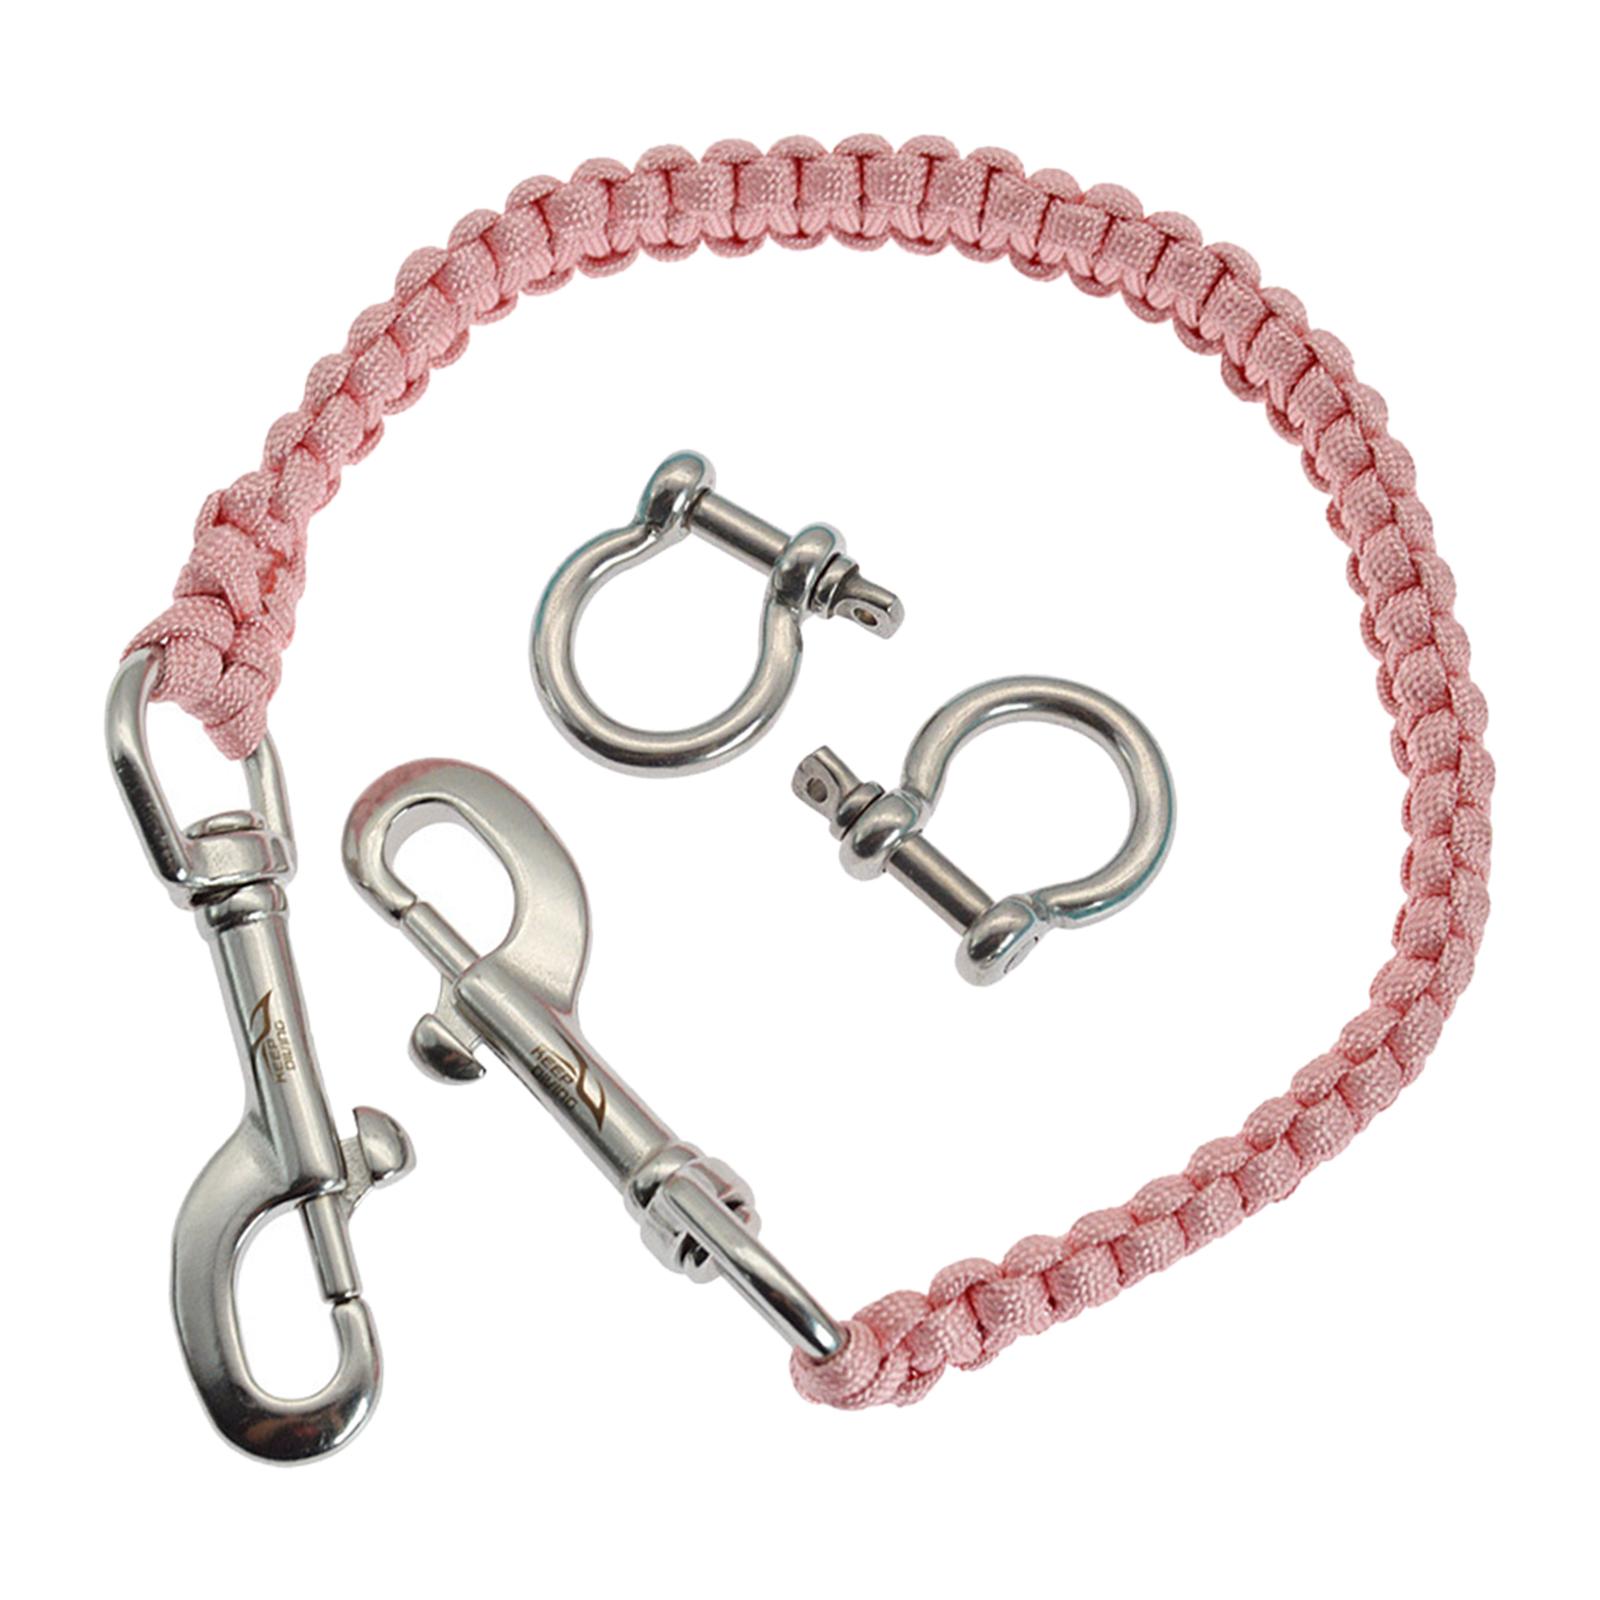 Diving Camera Hand Rope Lanyard Strap Underwater Photography Accessories pink